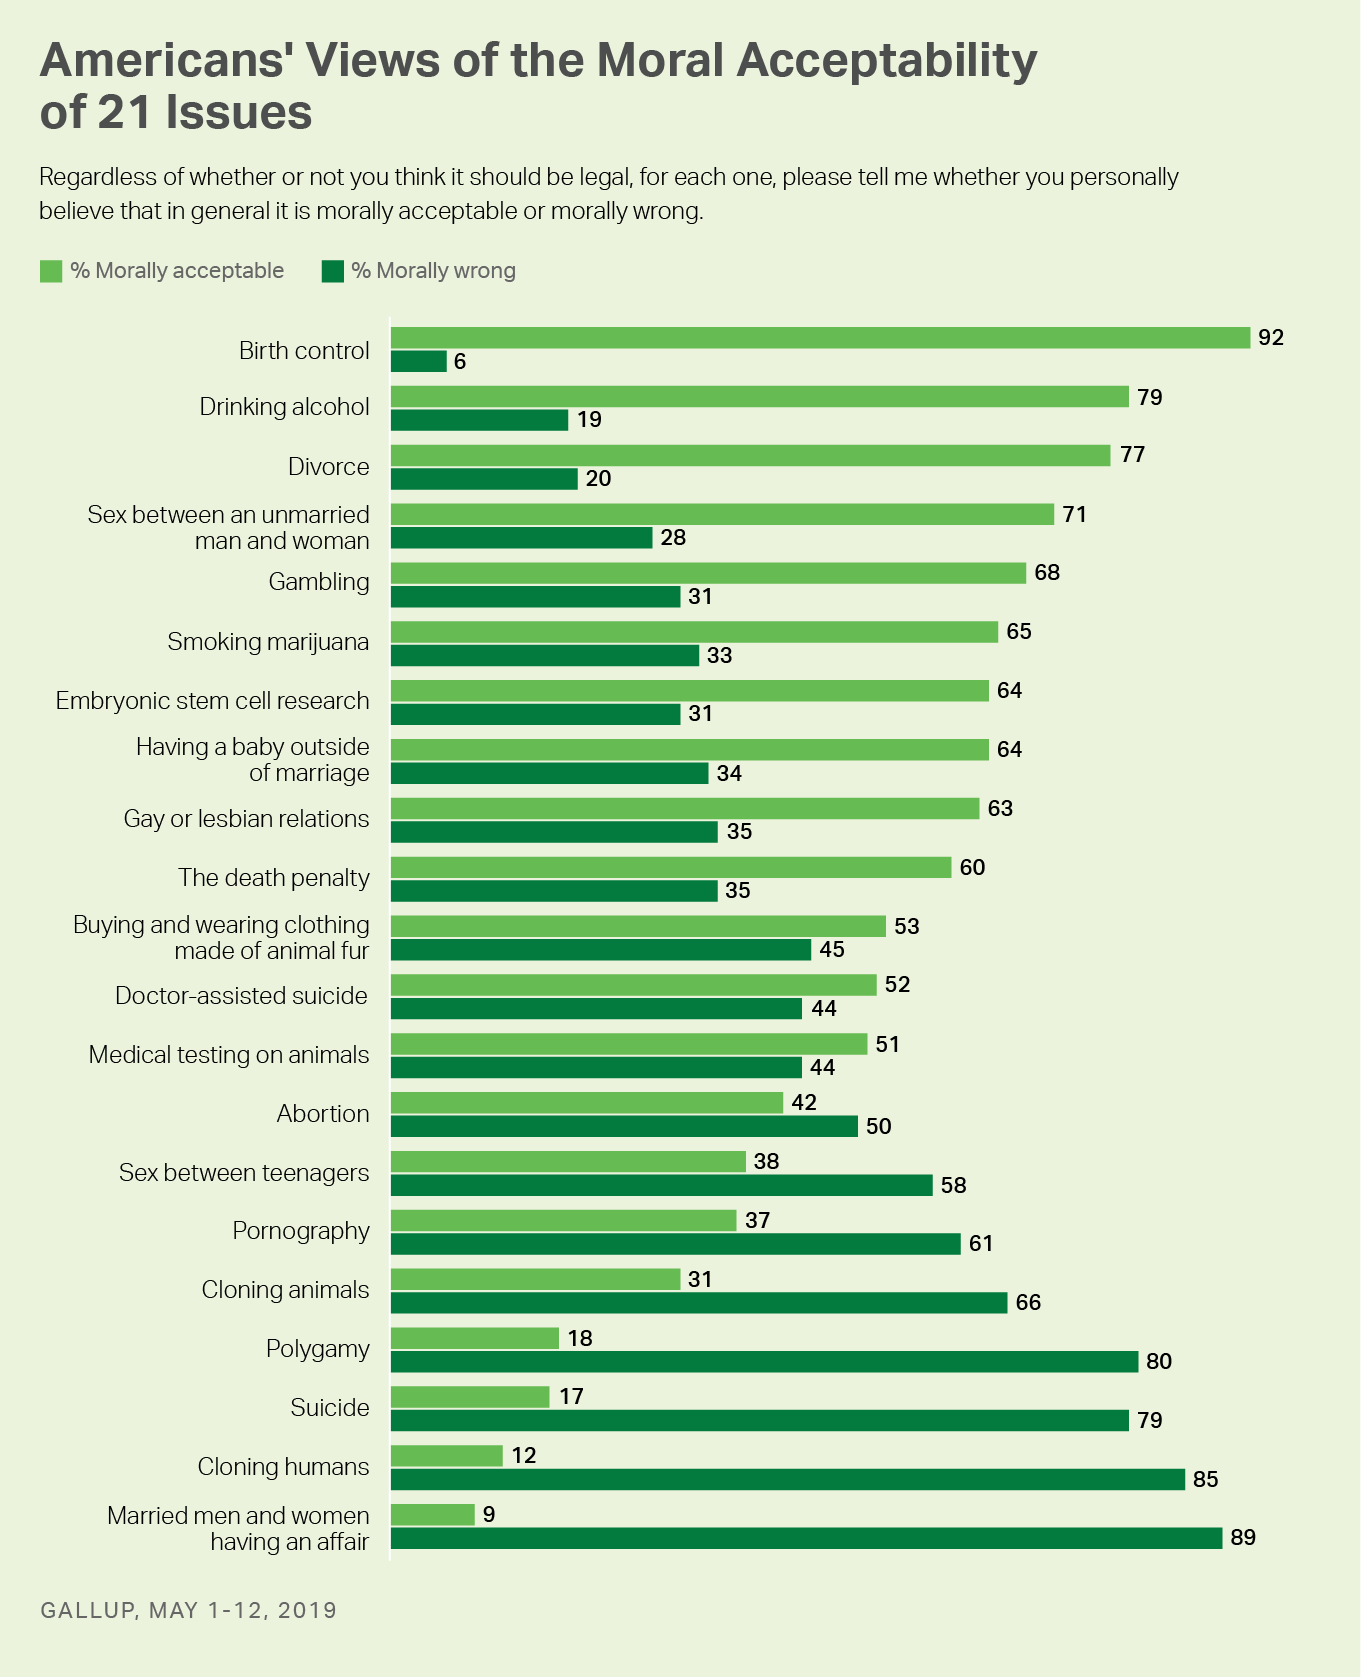 Americans’ views of the moral acceptability of 21 issues. Birth control tops the list, with 92% saying it’s acceptable.